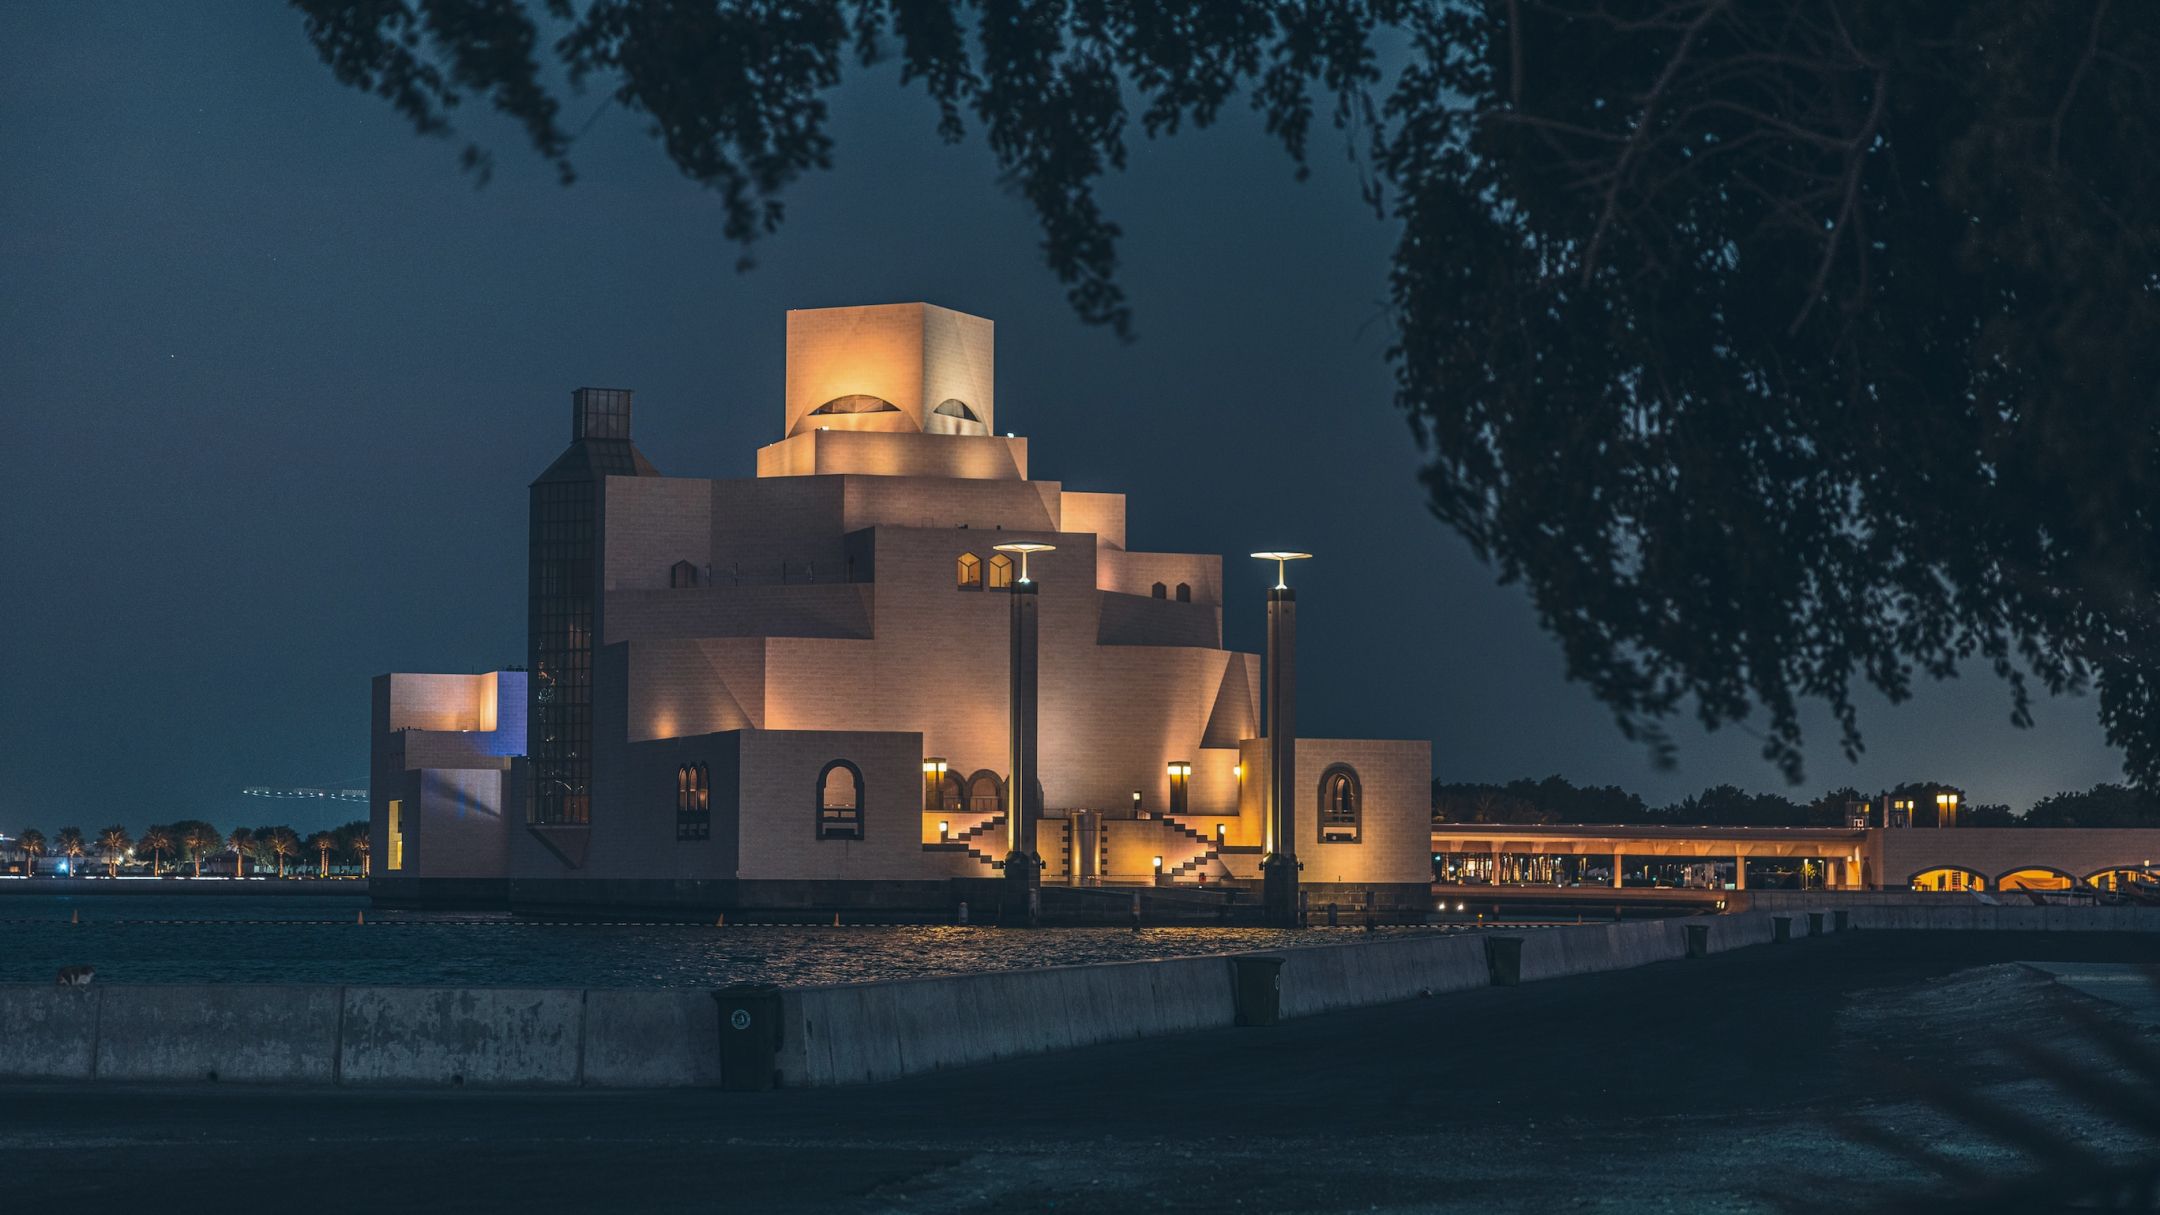 The elegant architecture of the Museum of Islamic Art in Qatar, illuminated with a warm glow against the night sky.